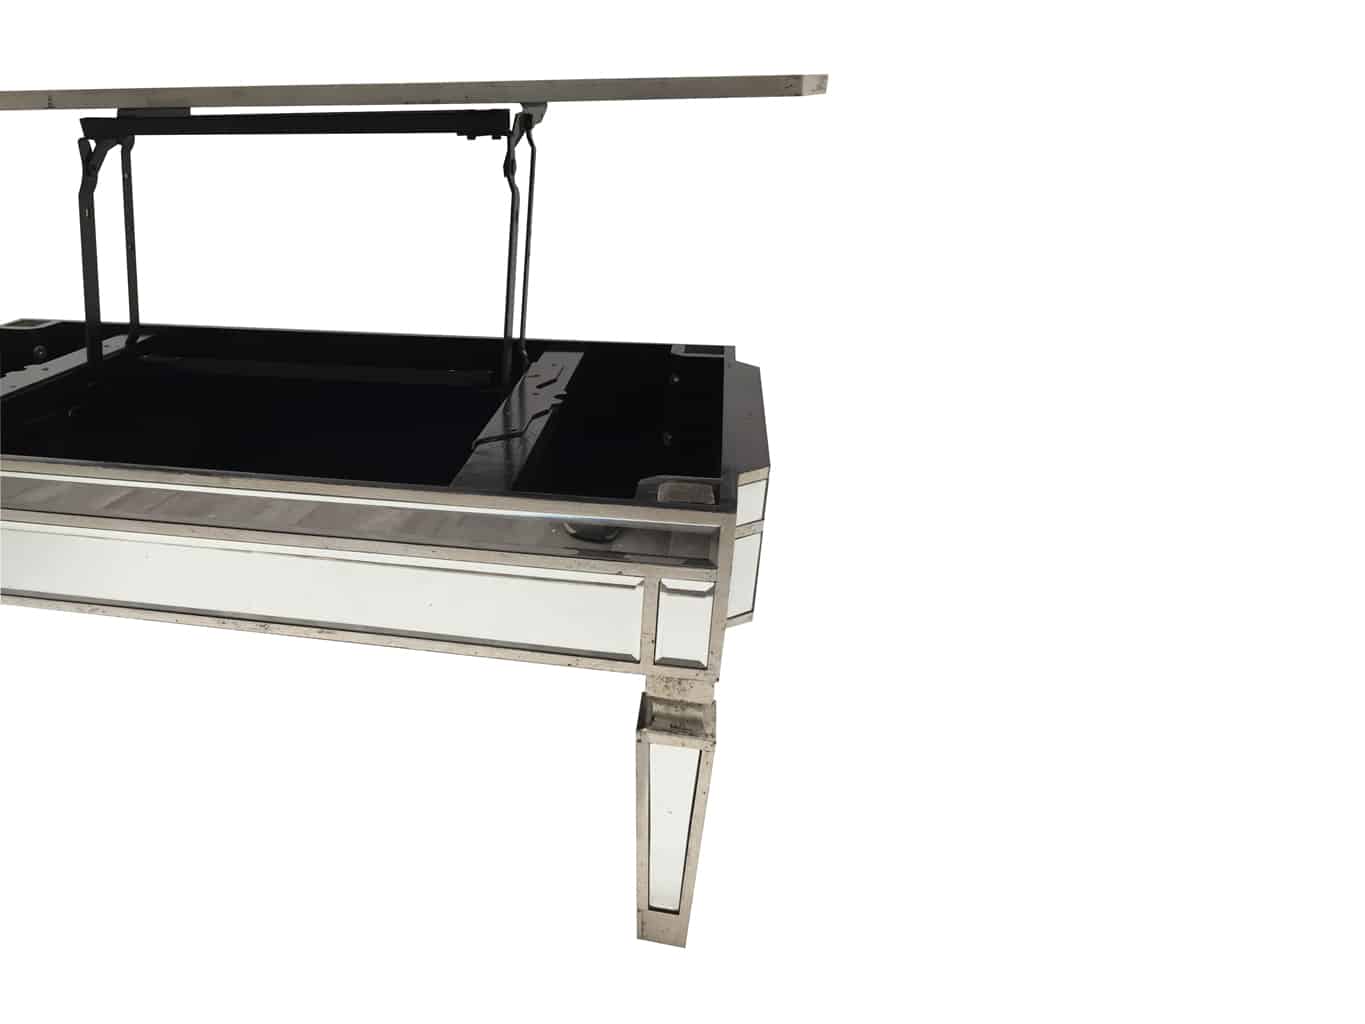 Mirrored coffee table with TV dinner lift